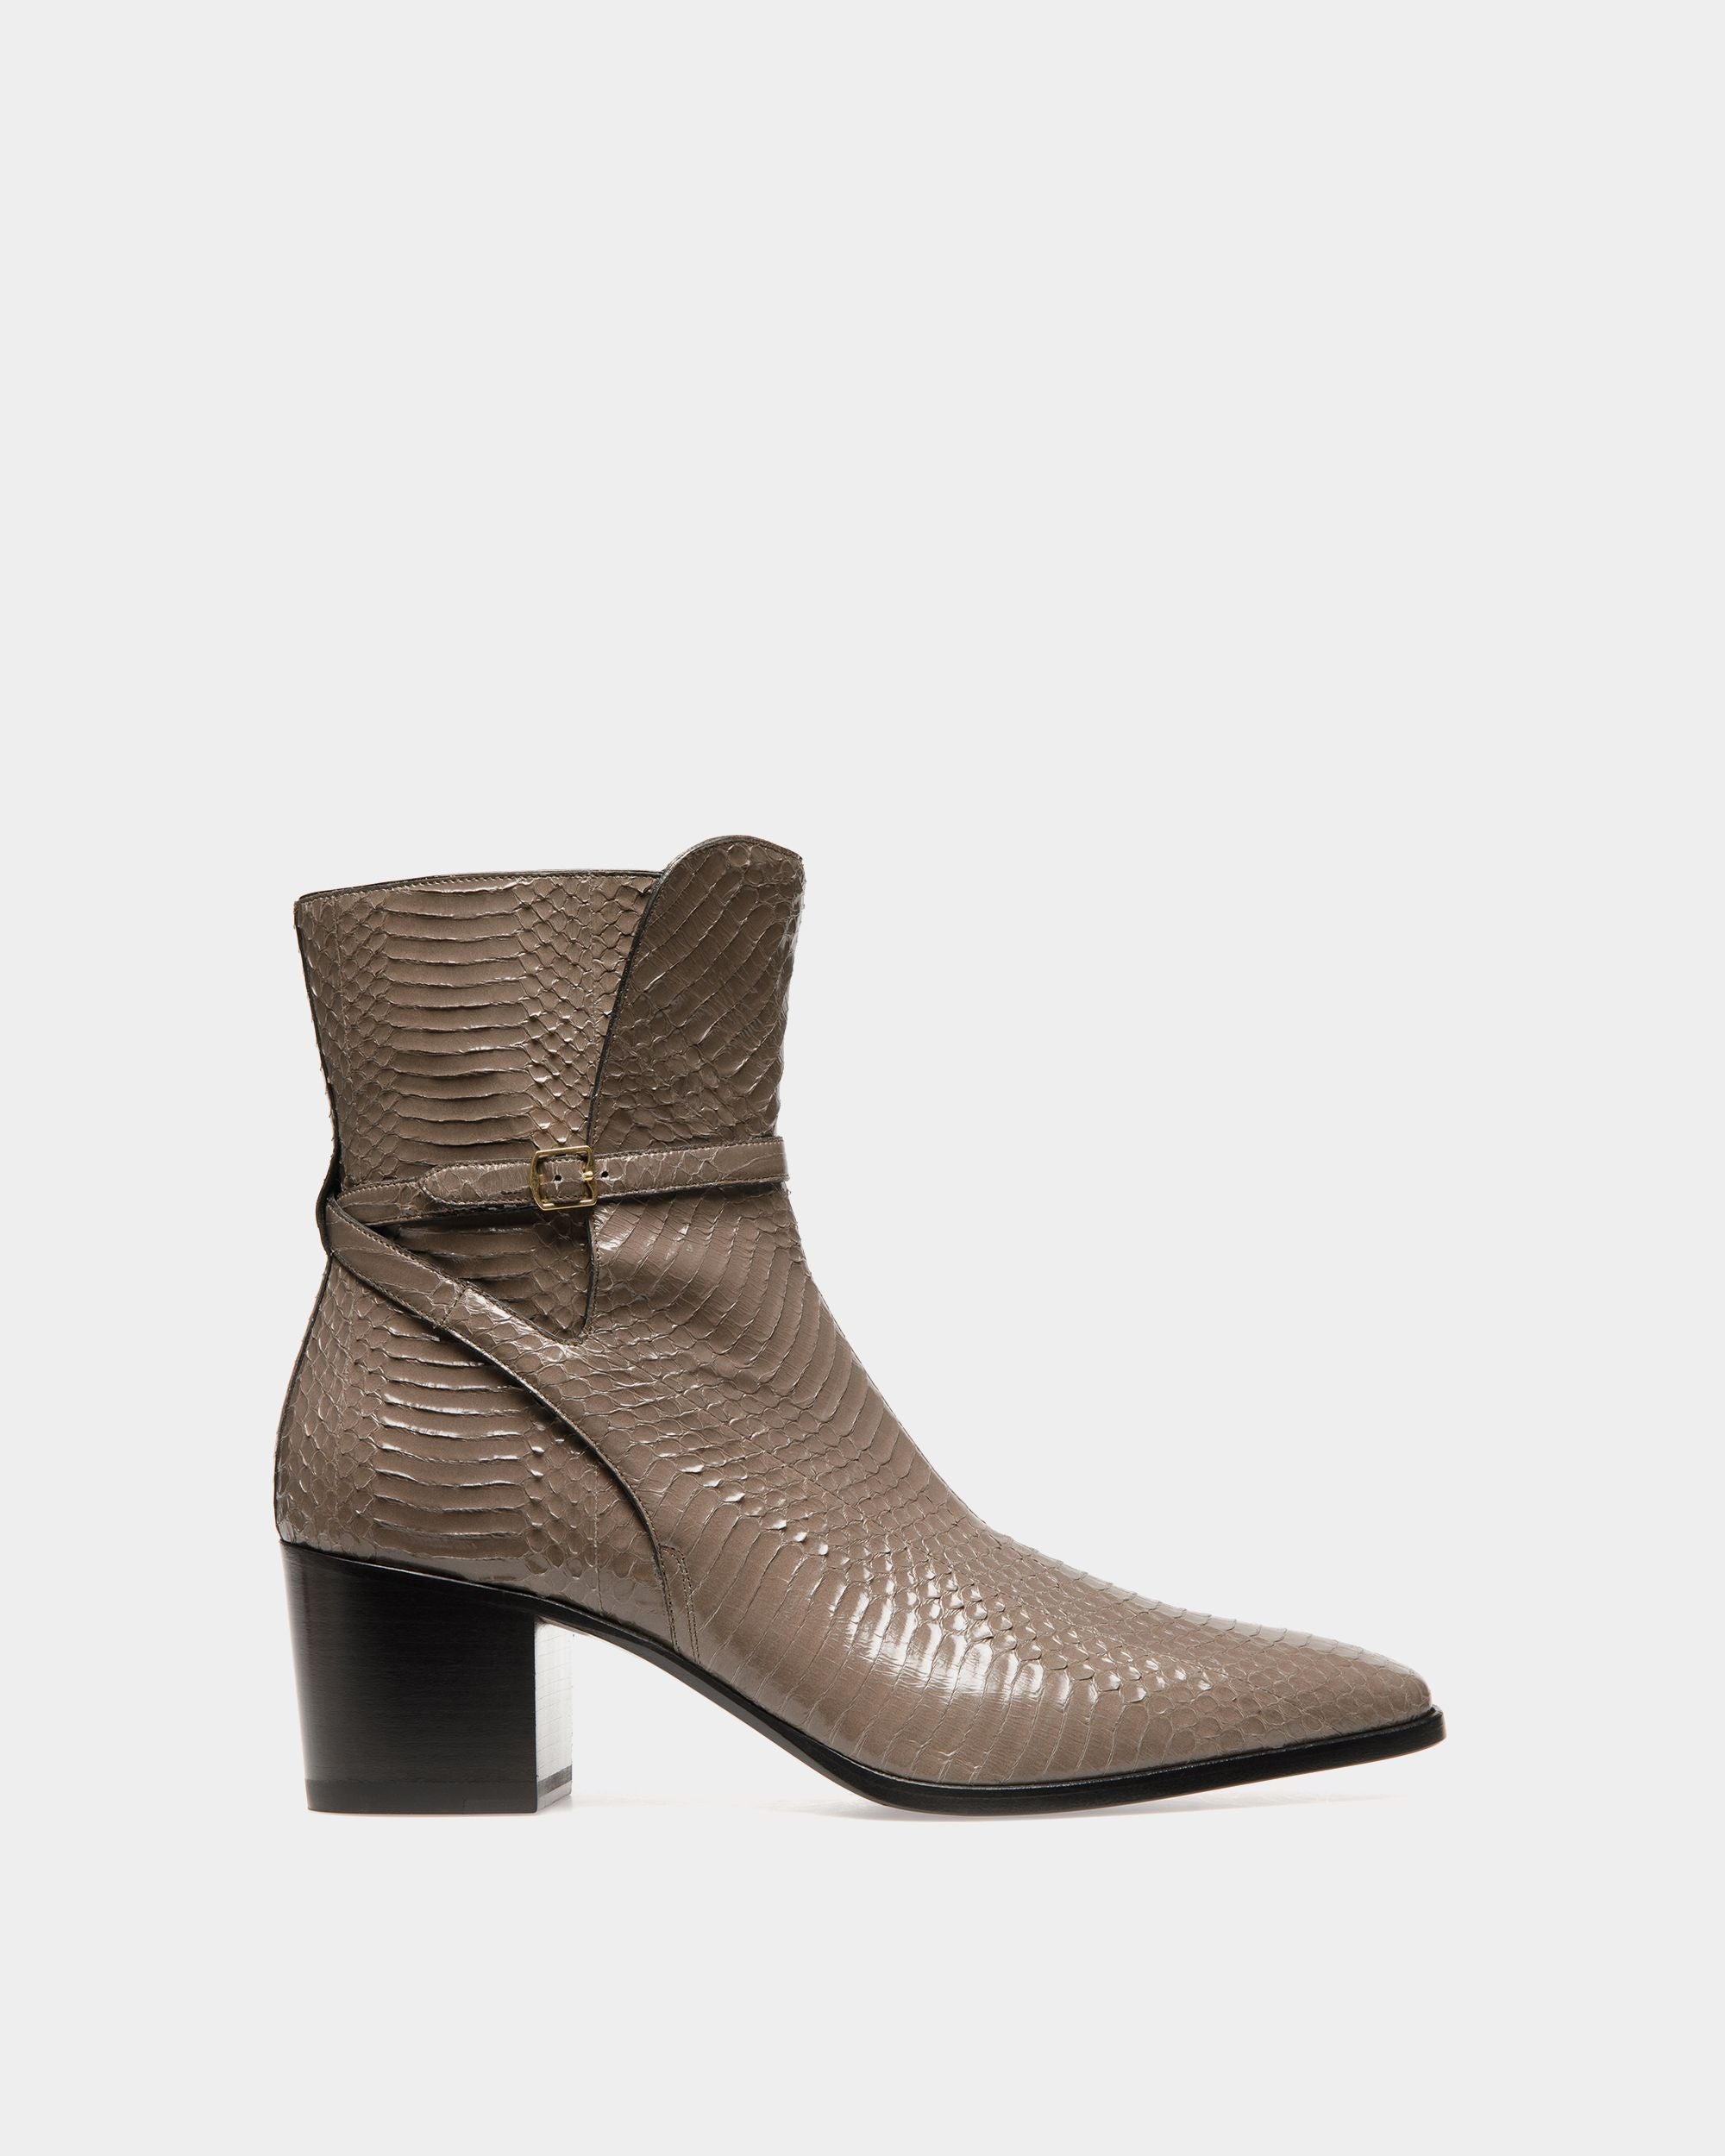 Villy| Men's Boots |Grey Leather | Bally | Still Life Side